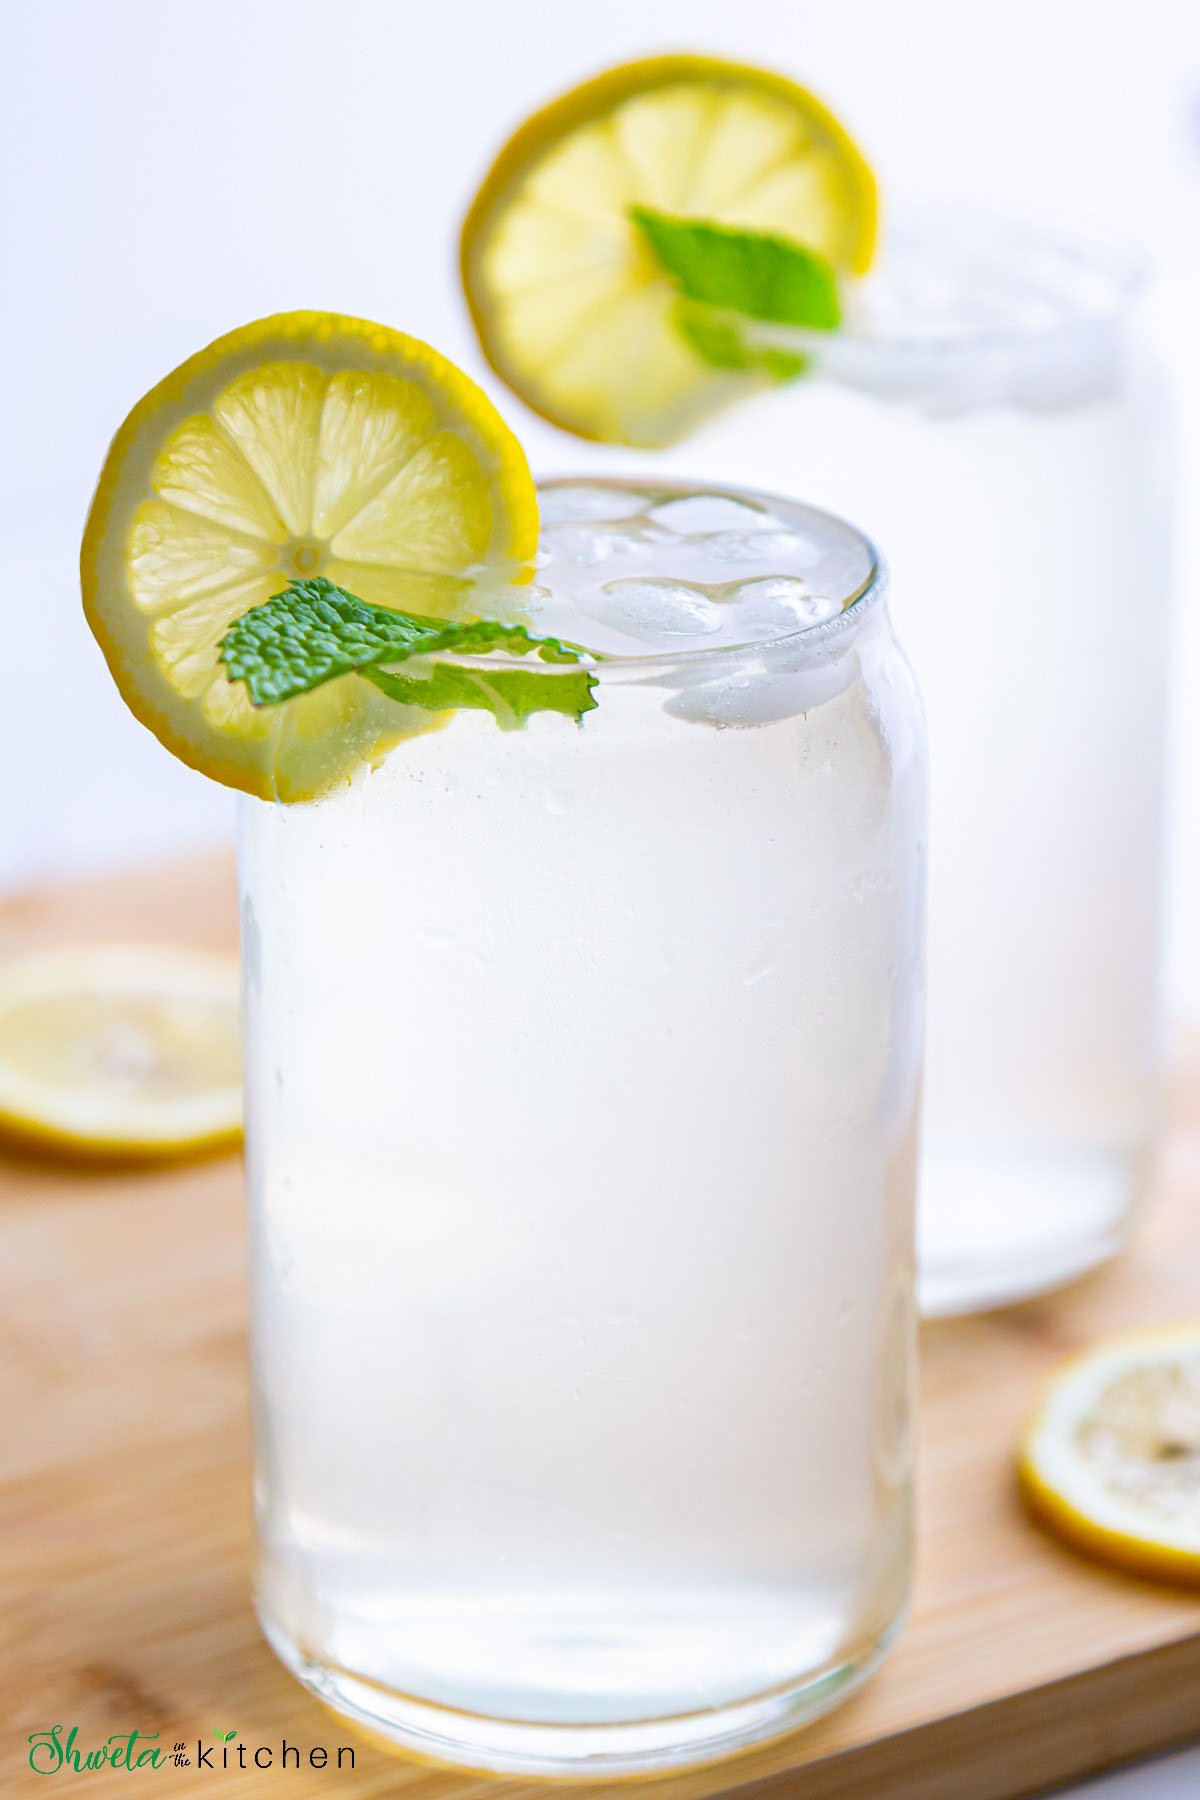 Glass of fresh squeezed lemonade garnished with lemon slice and mint leaves